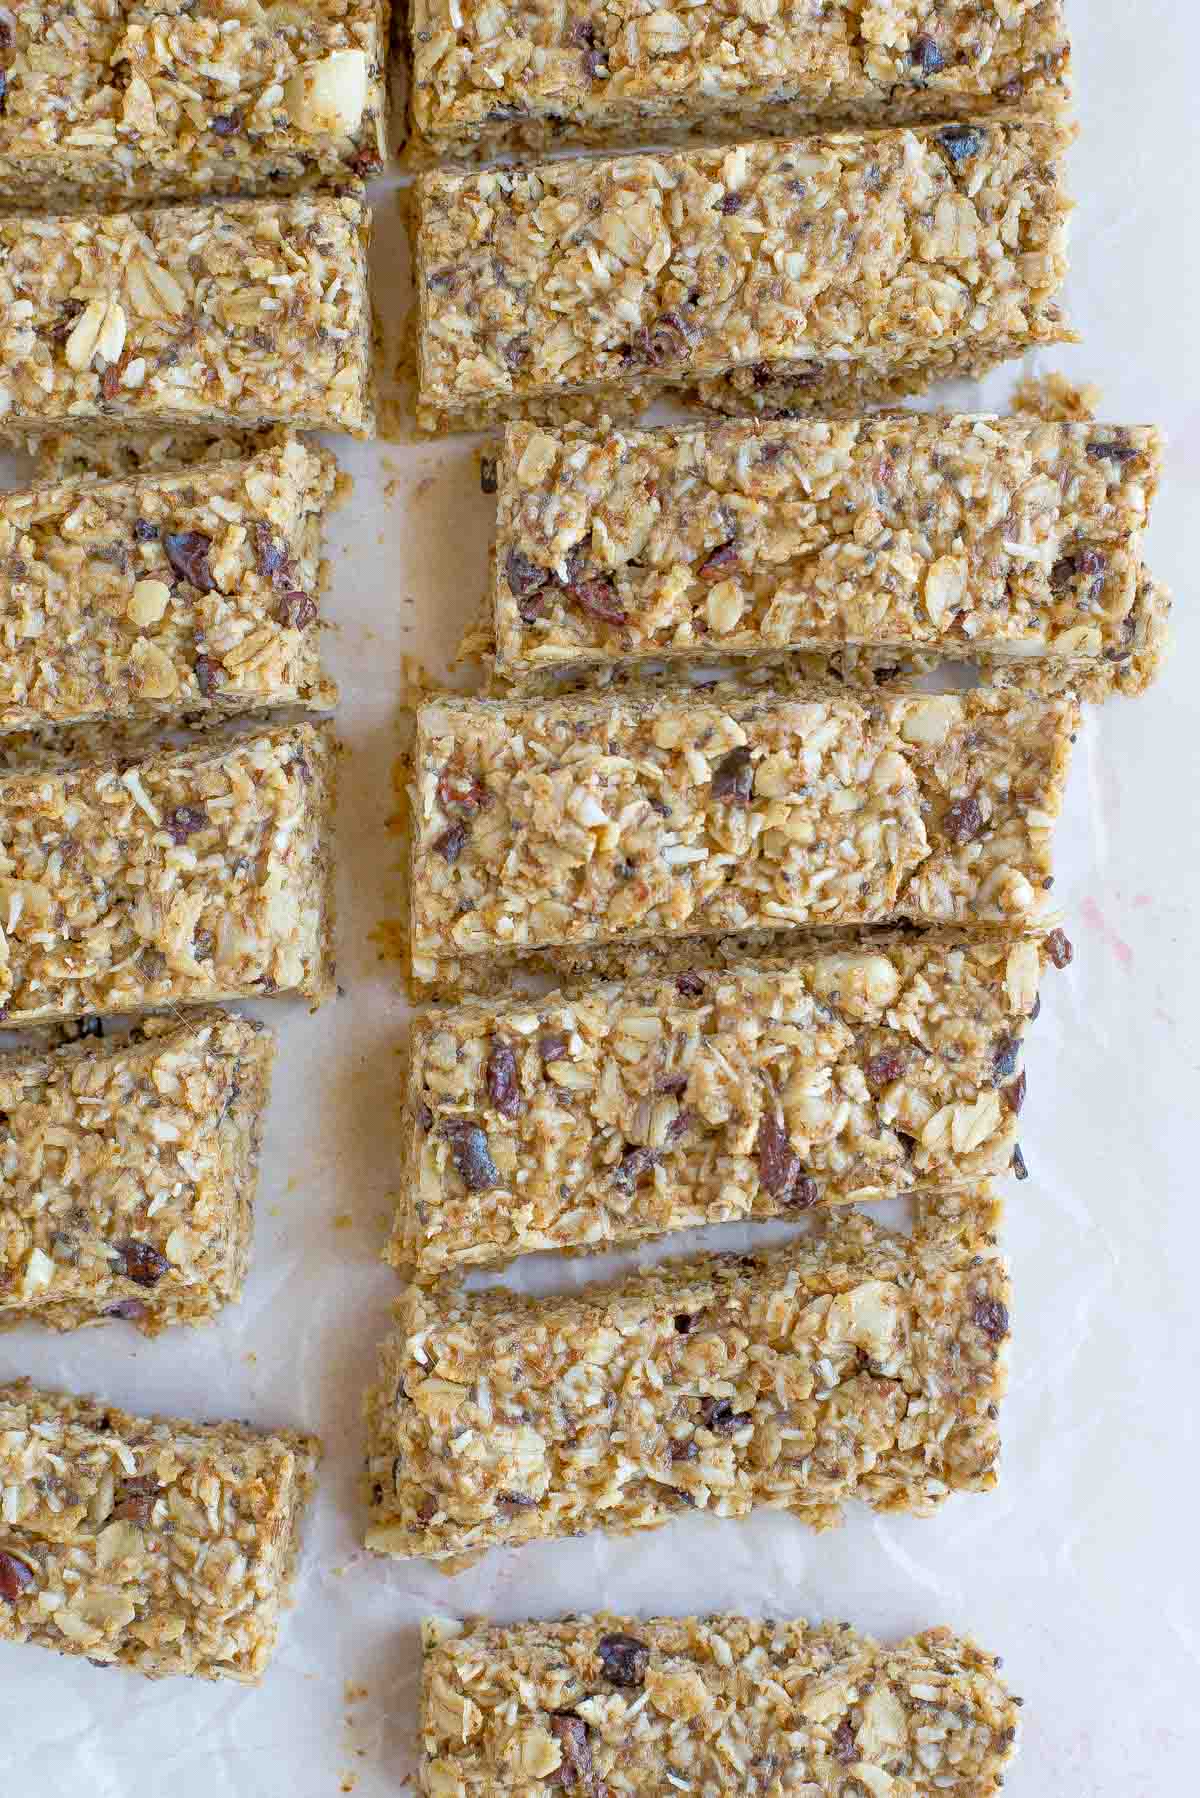 Are you looking for the perfect homemade snack? Check out this 10 minute chewy, no-bake, gluten free granola bar recipe. You'll be glad you did.